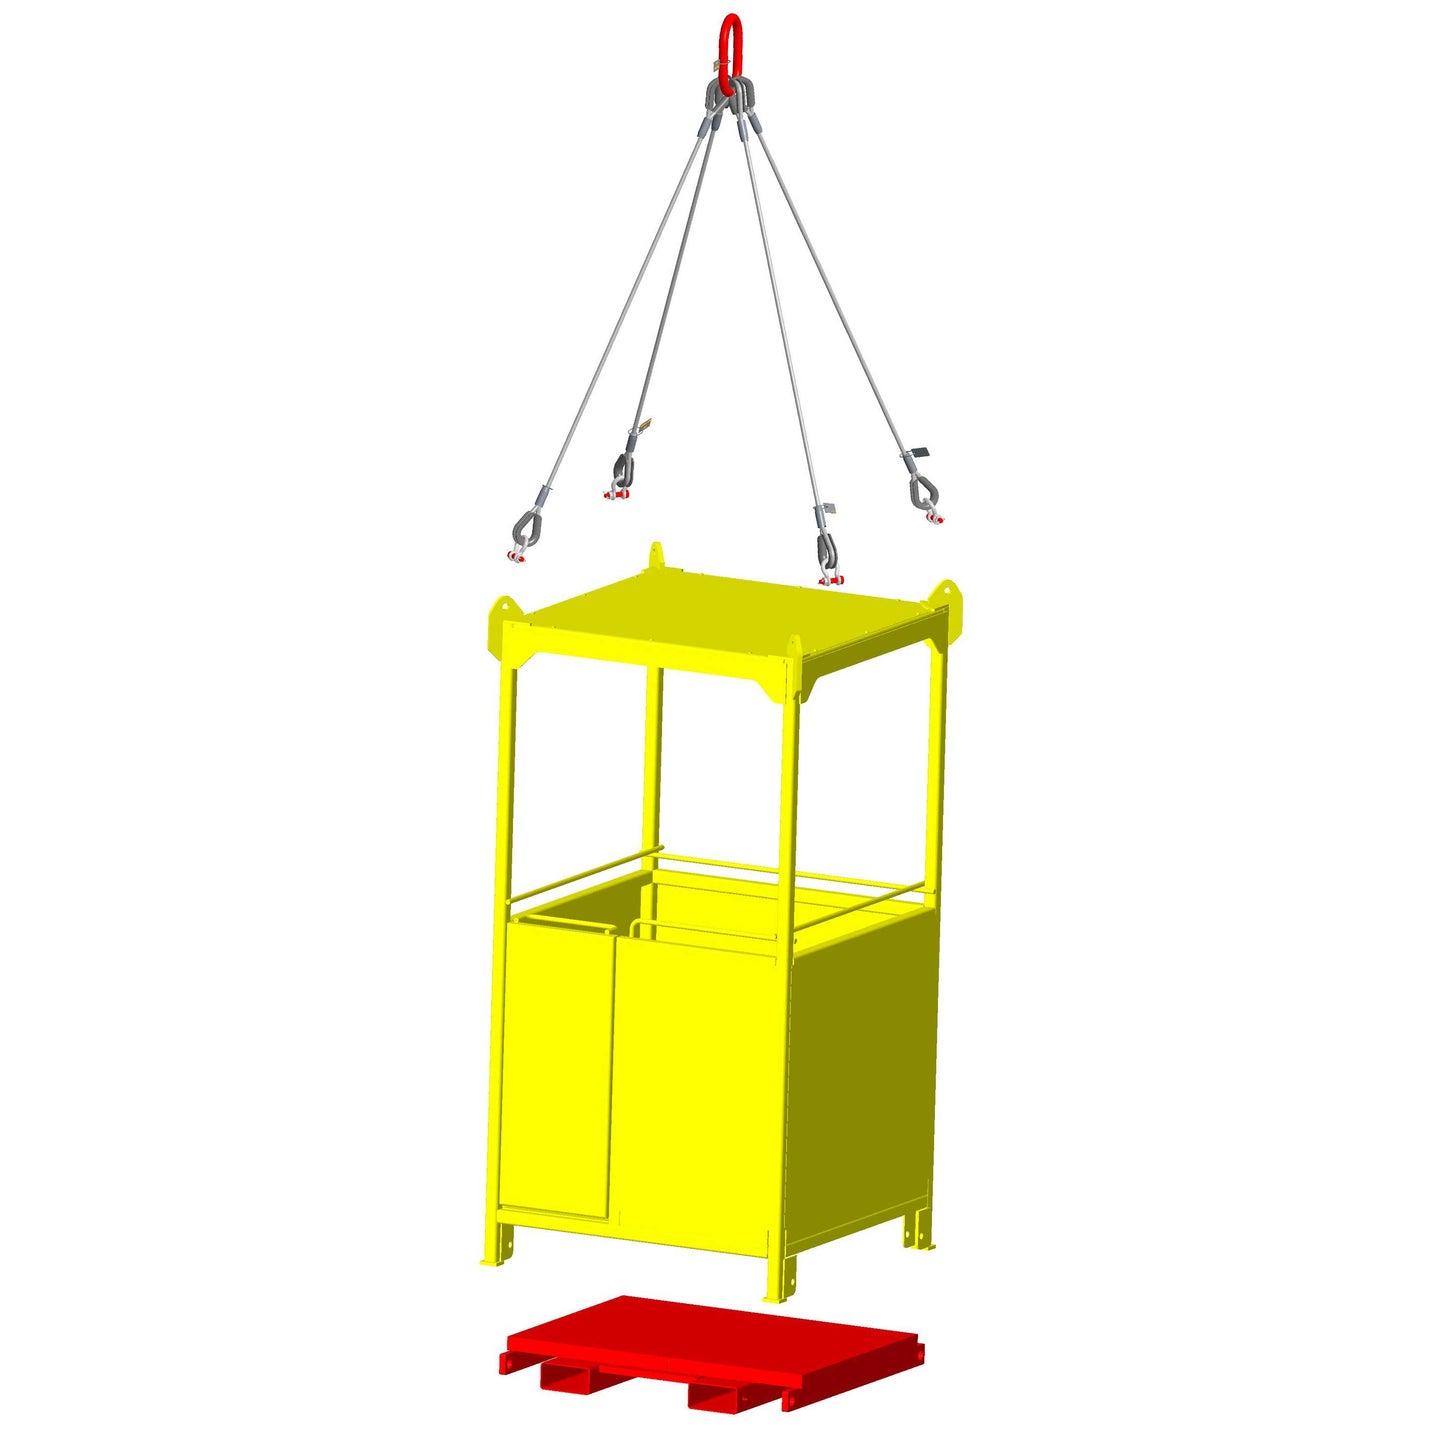 M&W 1500 lb. Personnel Lifting Basket with Test Weight & Suspension Bridle